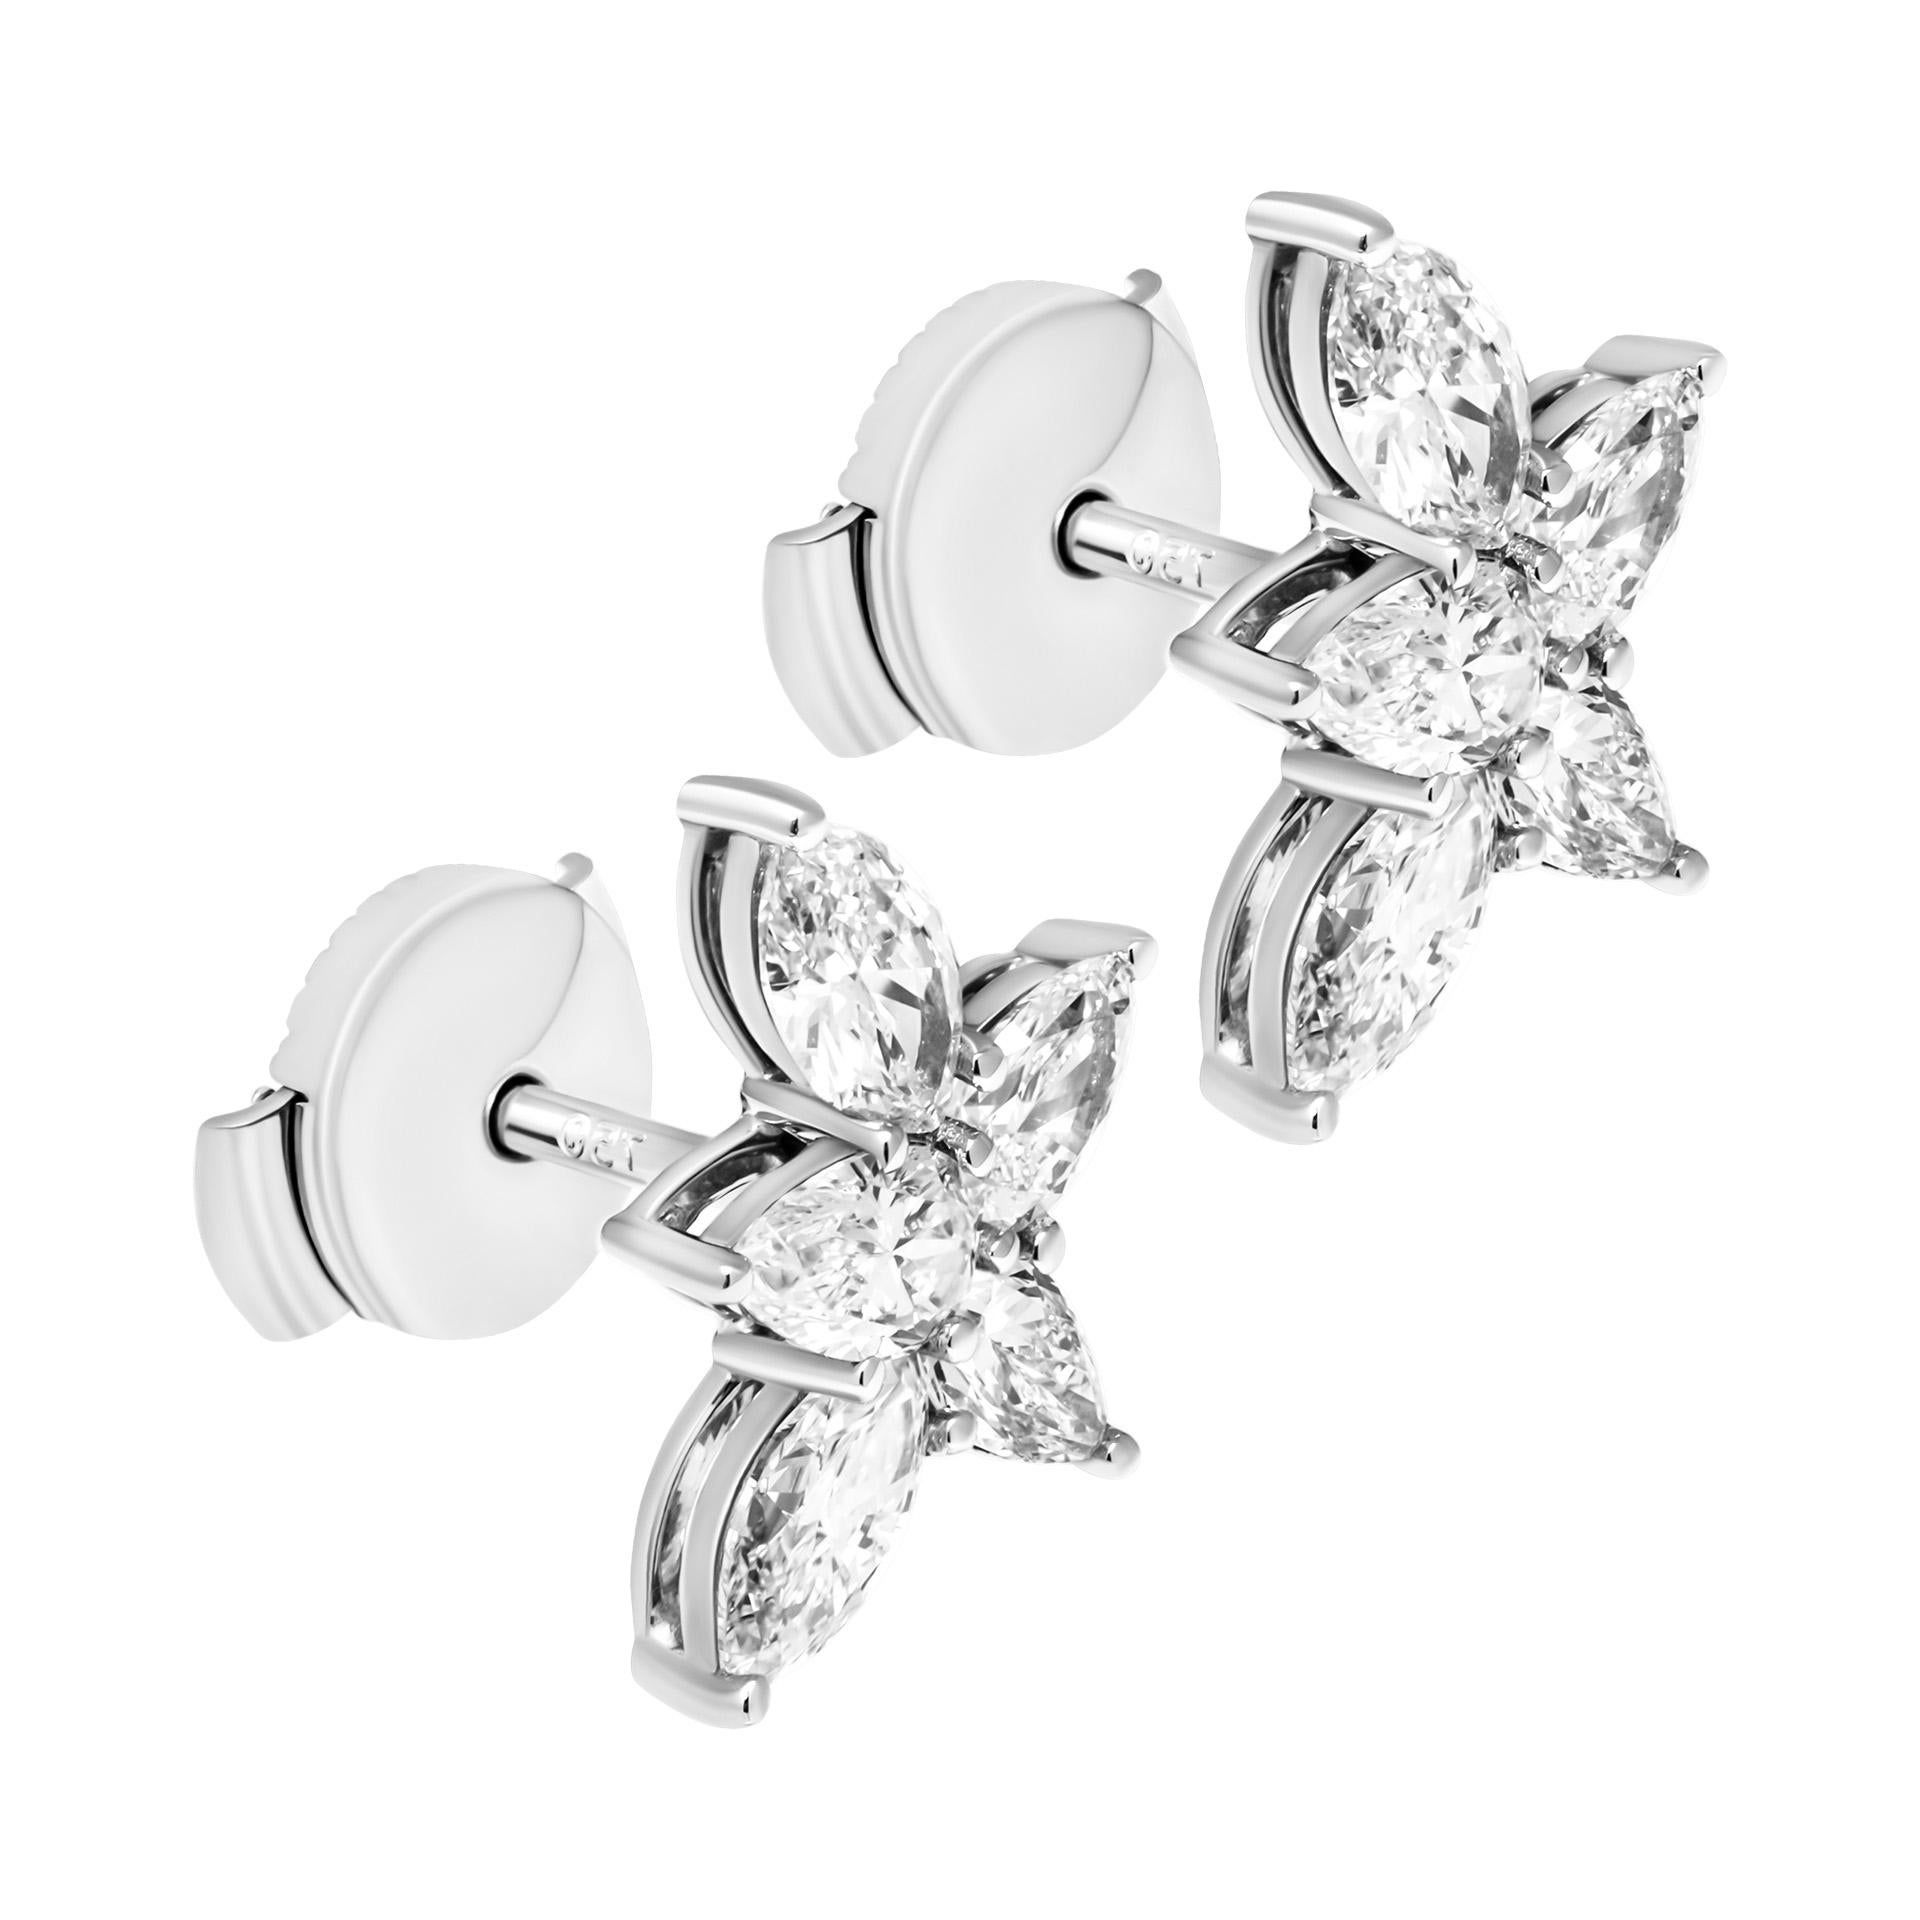 Cluster Earrings in 18K White Gold
with mixed shaped diamonds
4st marquee totaling 0.58ct F/G color VS clarity
6st pear shapes totaling 0.61ct F/G color VS clarity

Pressure Back lock system 
